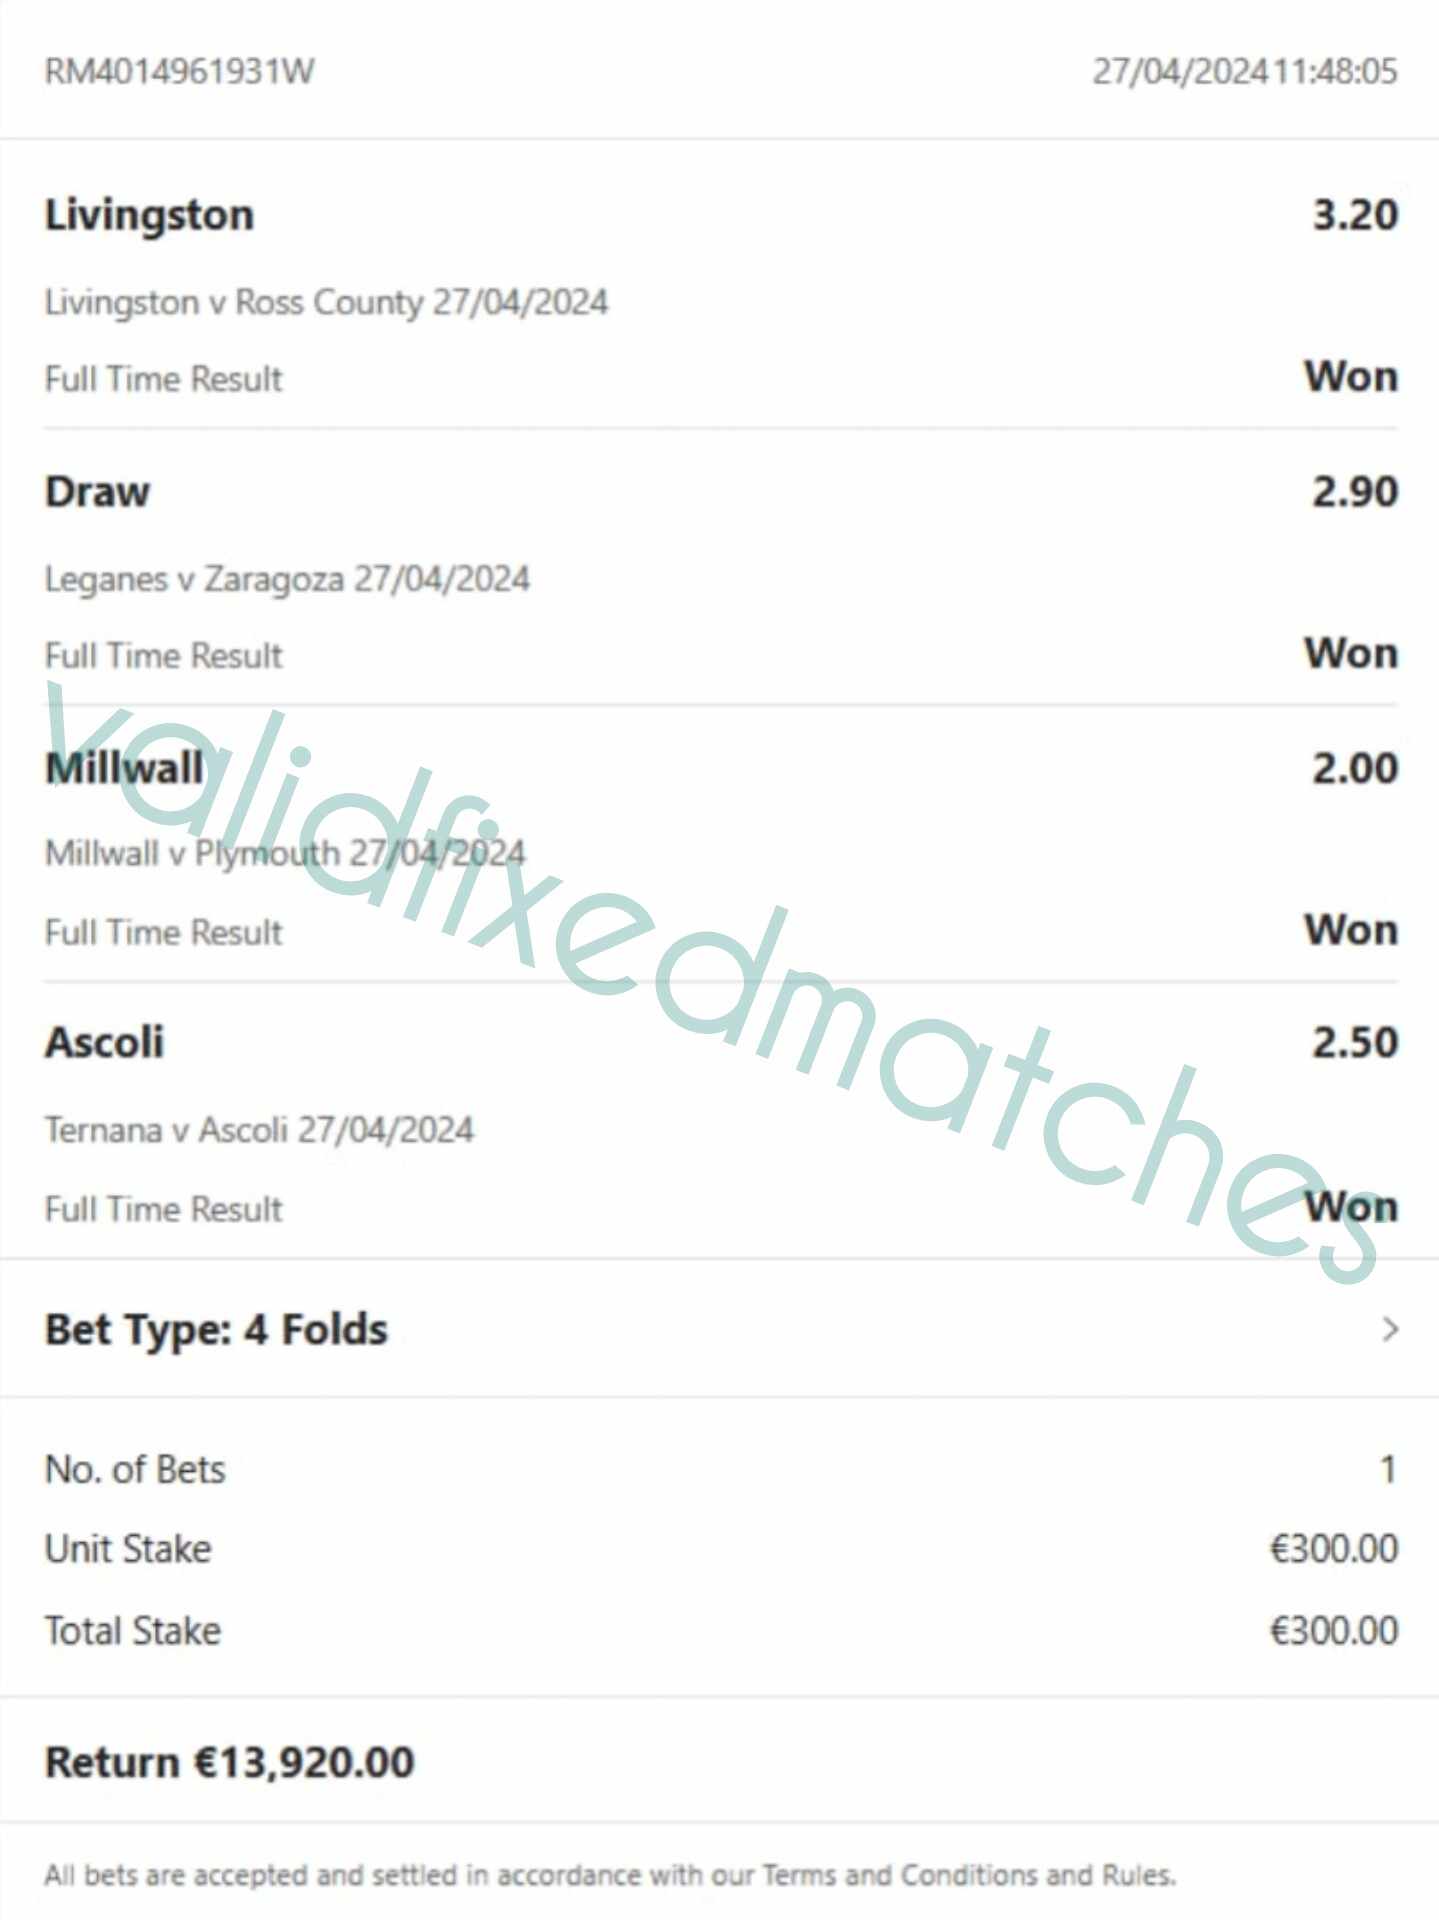 valid ticket fixed matches